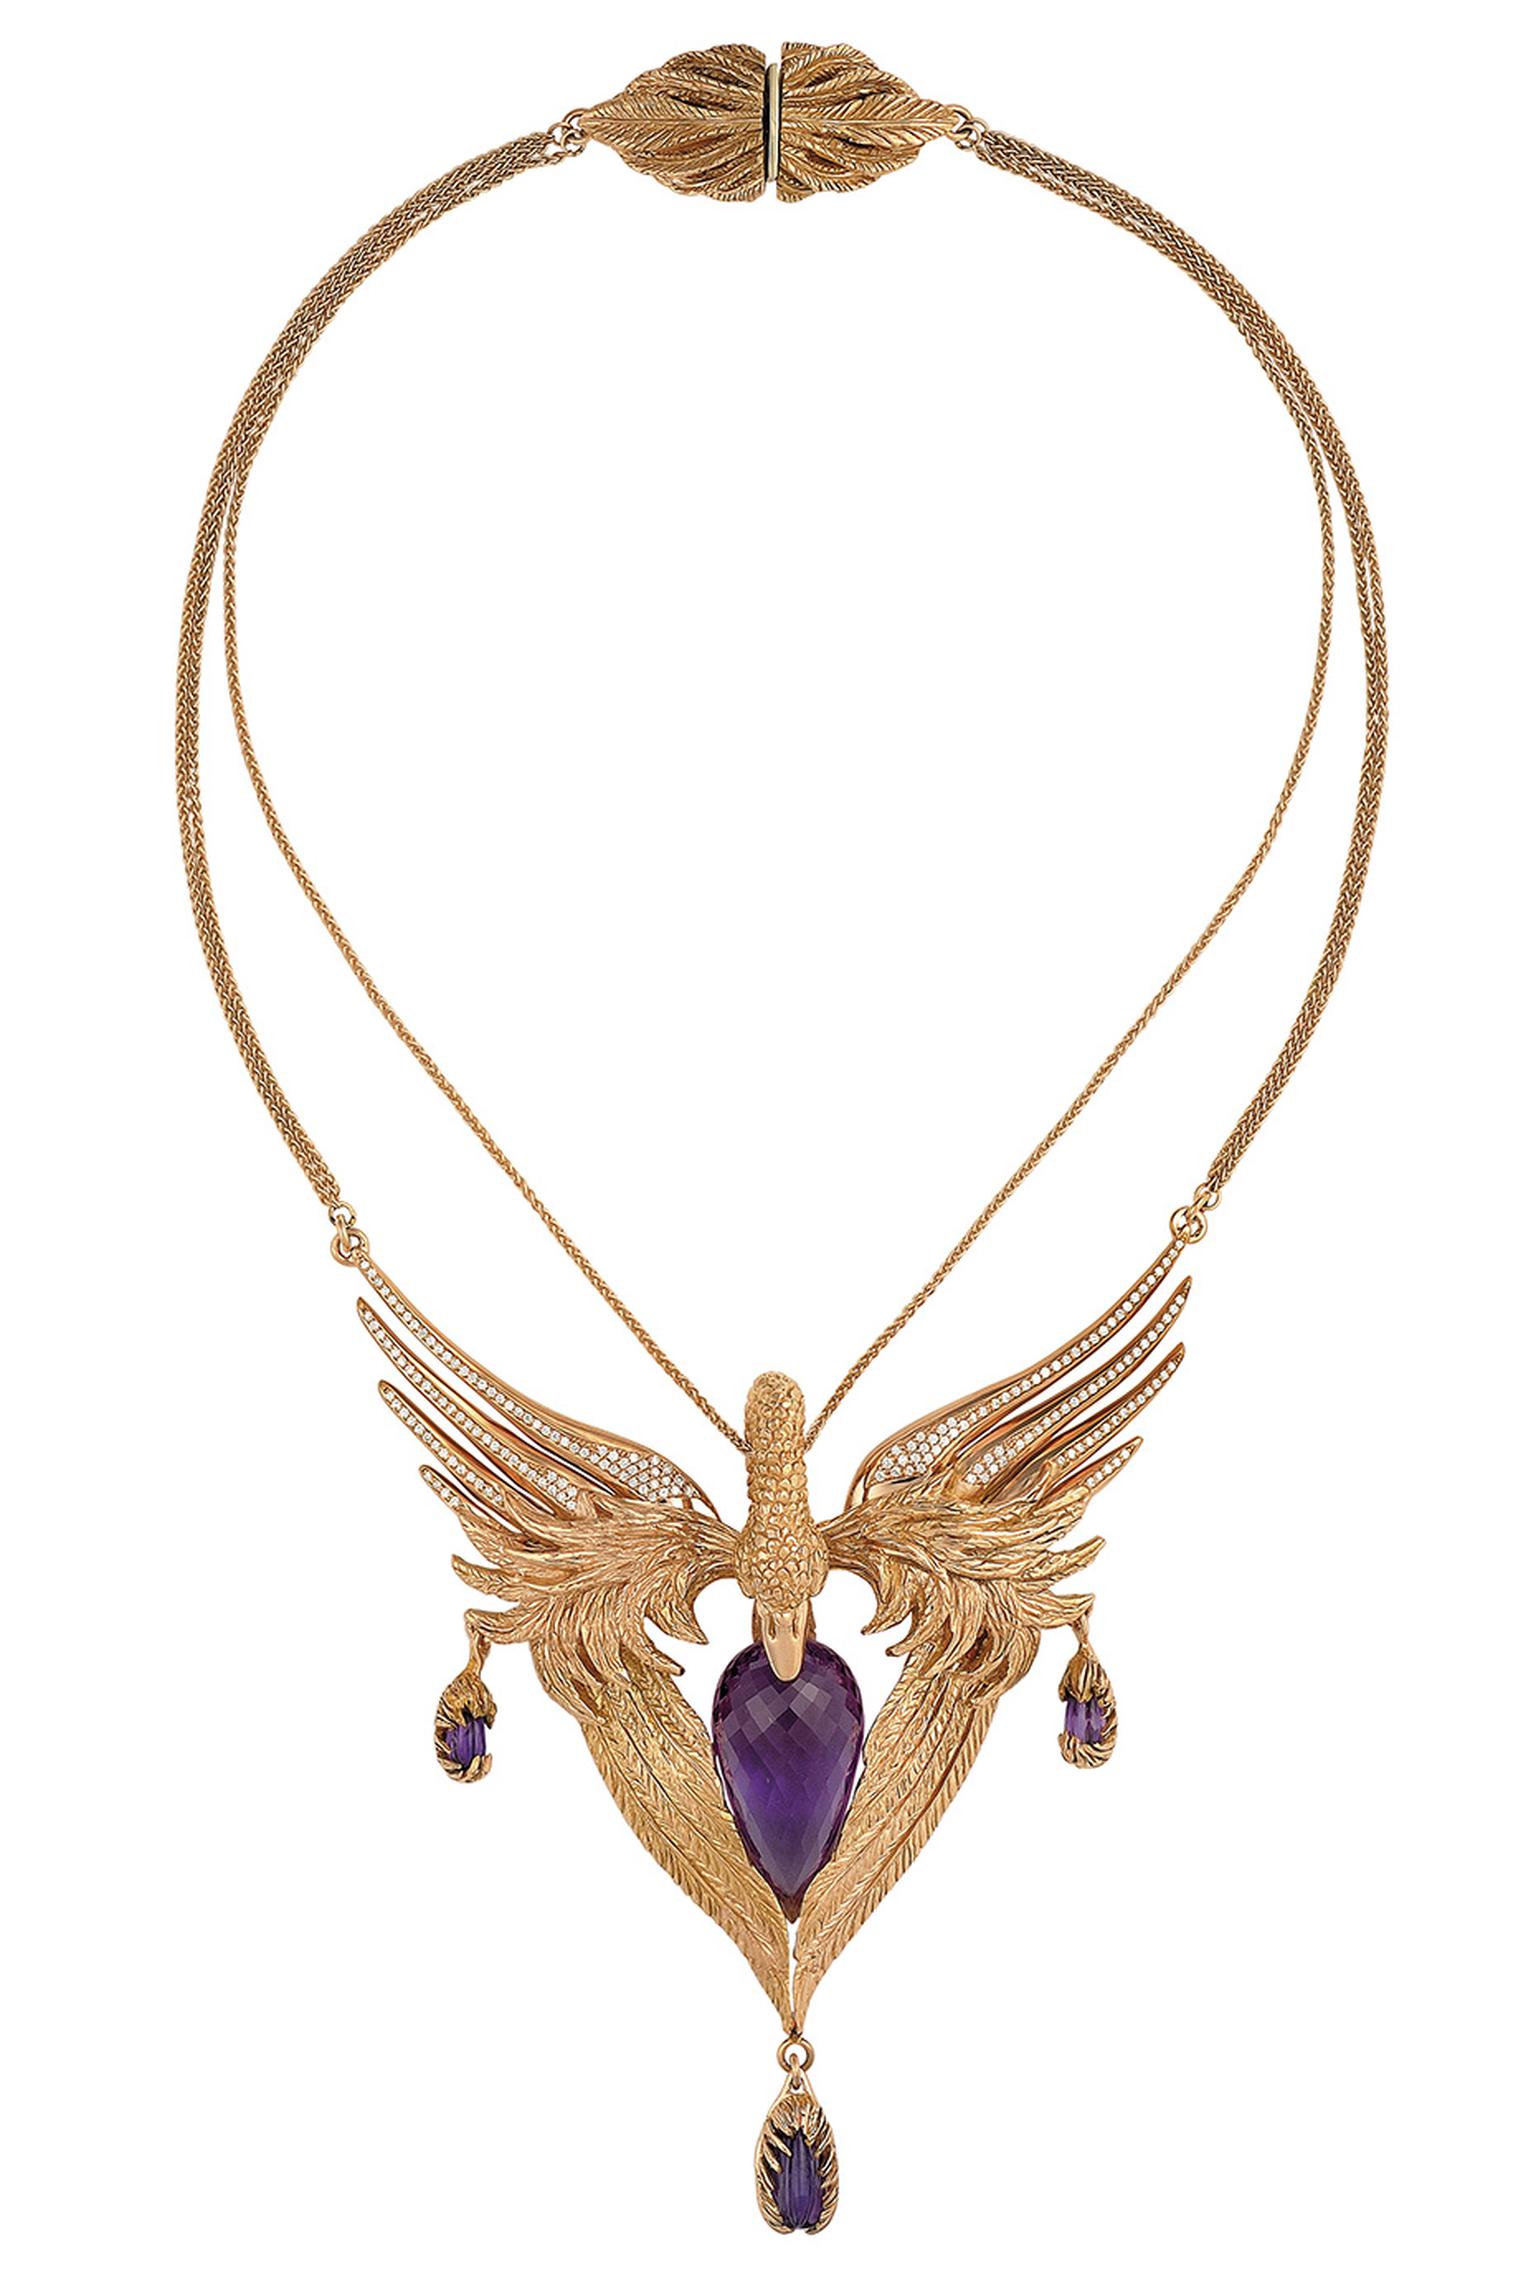 Duffy for Gemfields Swan collar necklace in rose gold, set with Gemfields amethysts